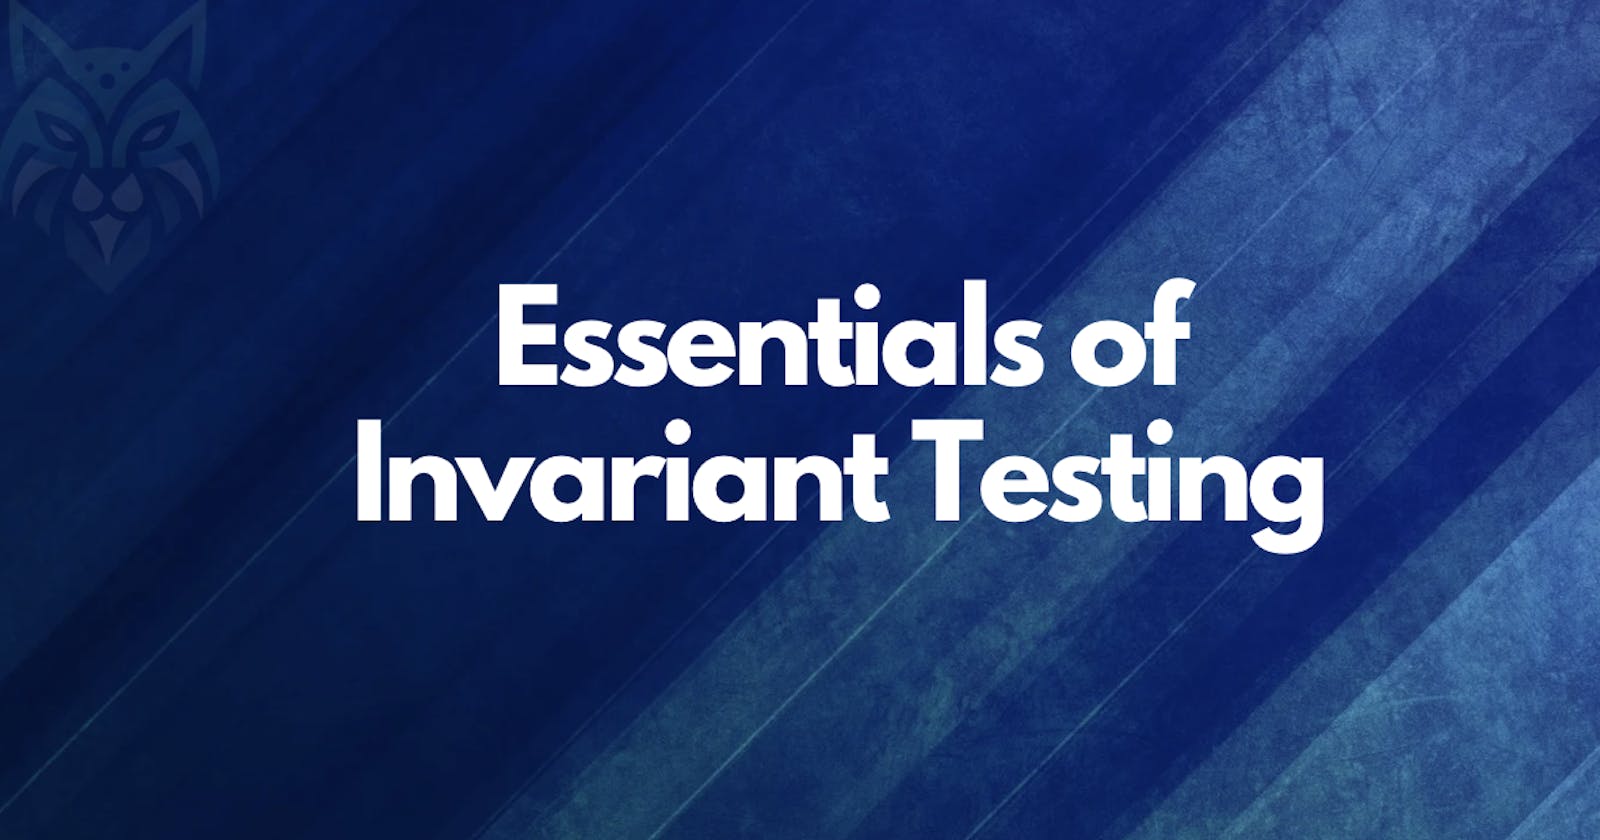 Essentials of Invariant Testing for Smart Contracts